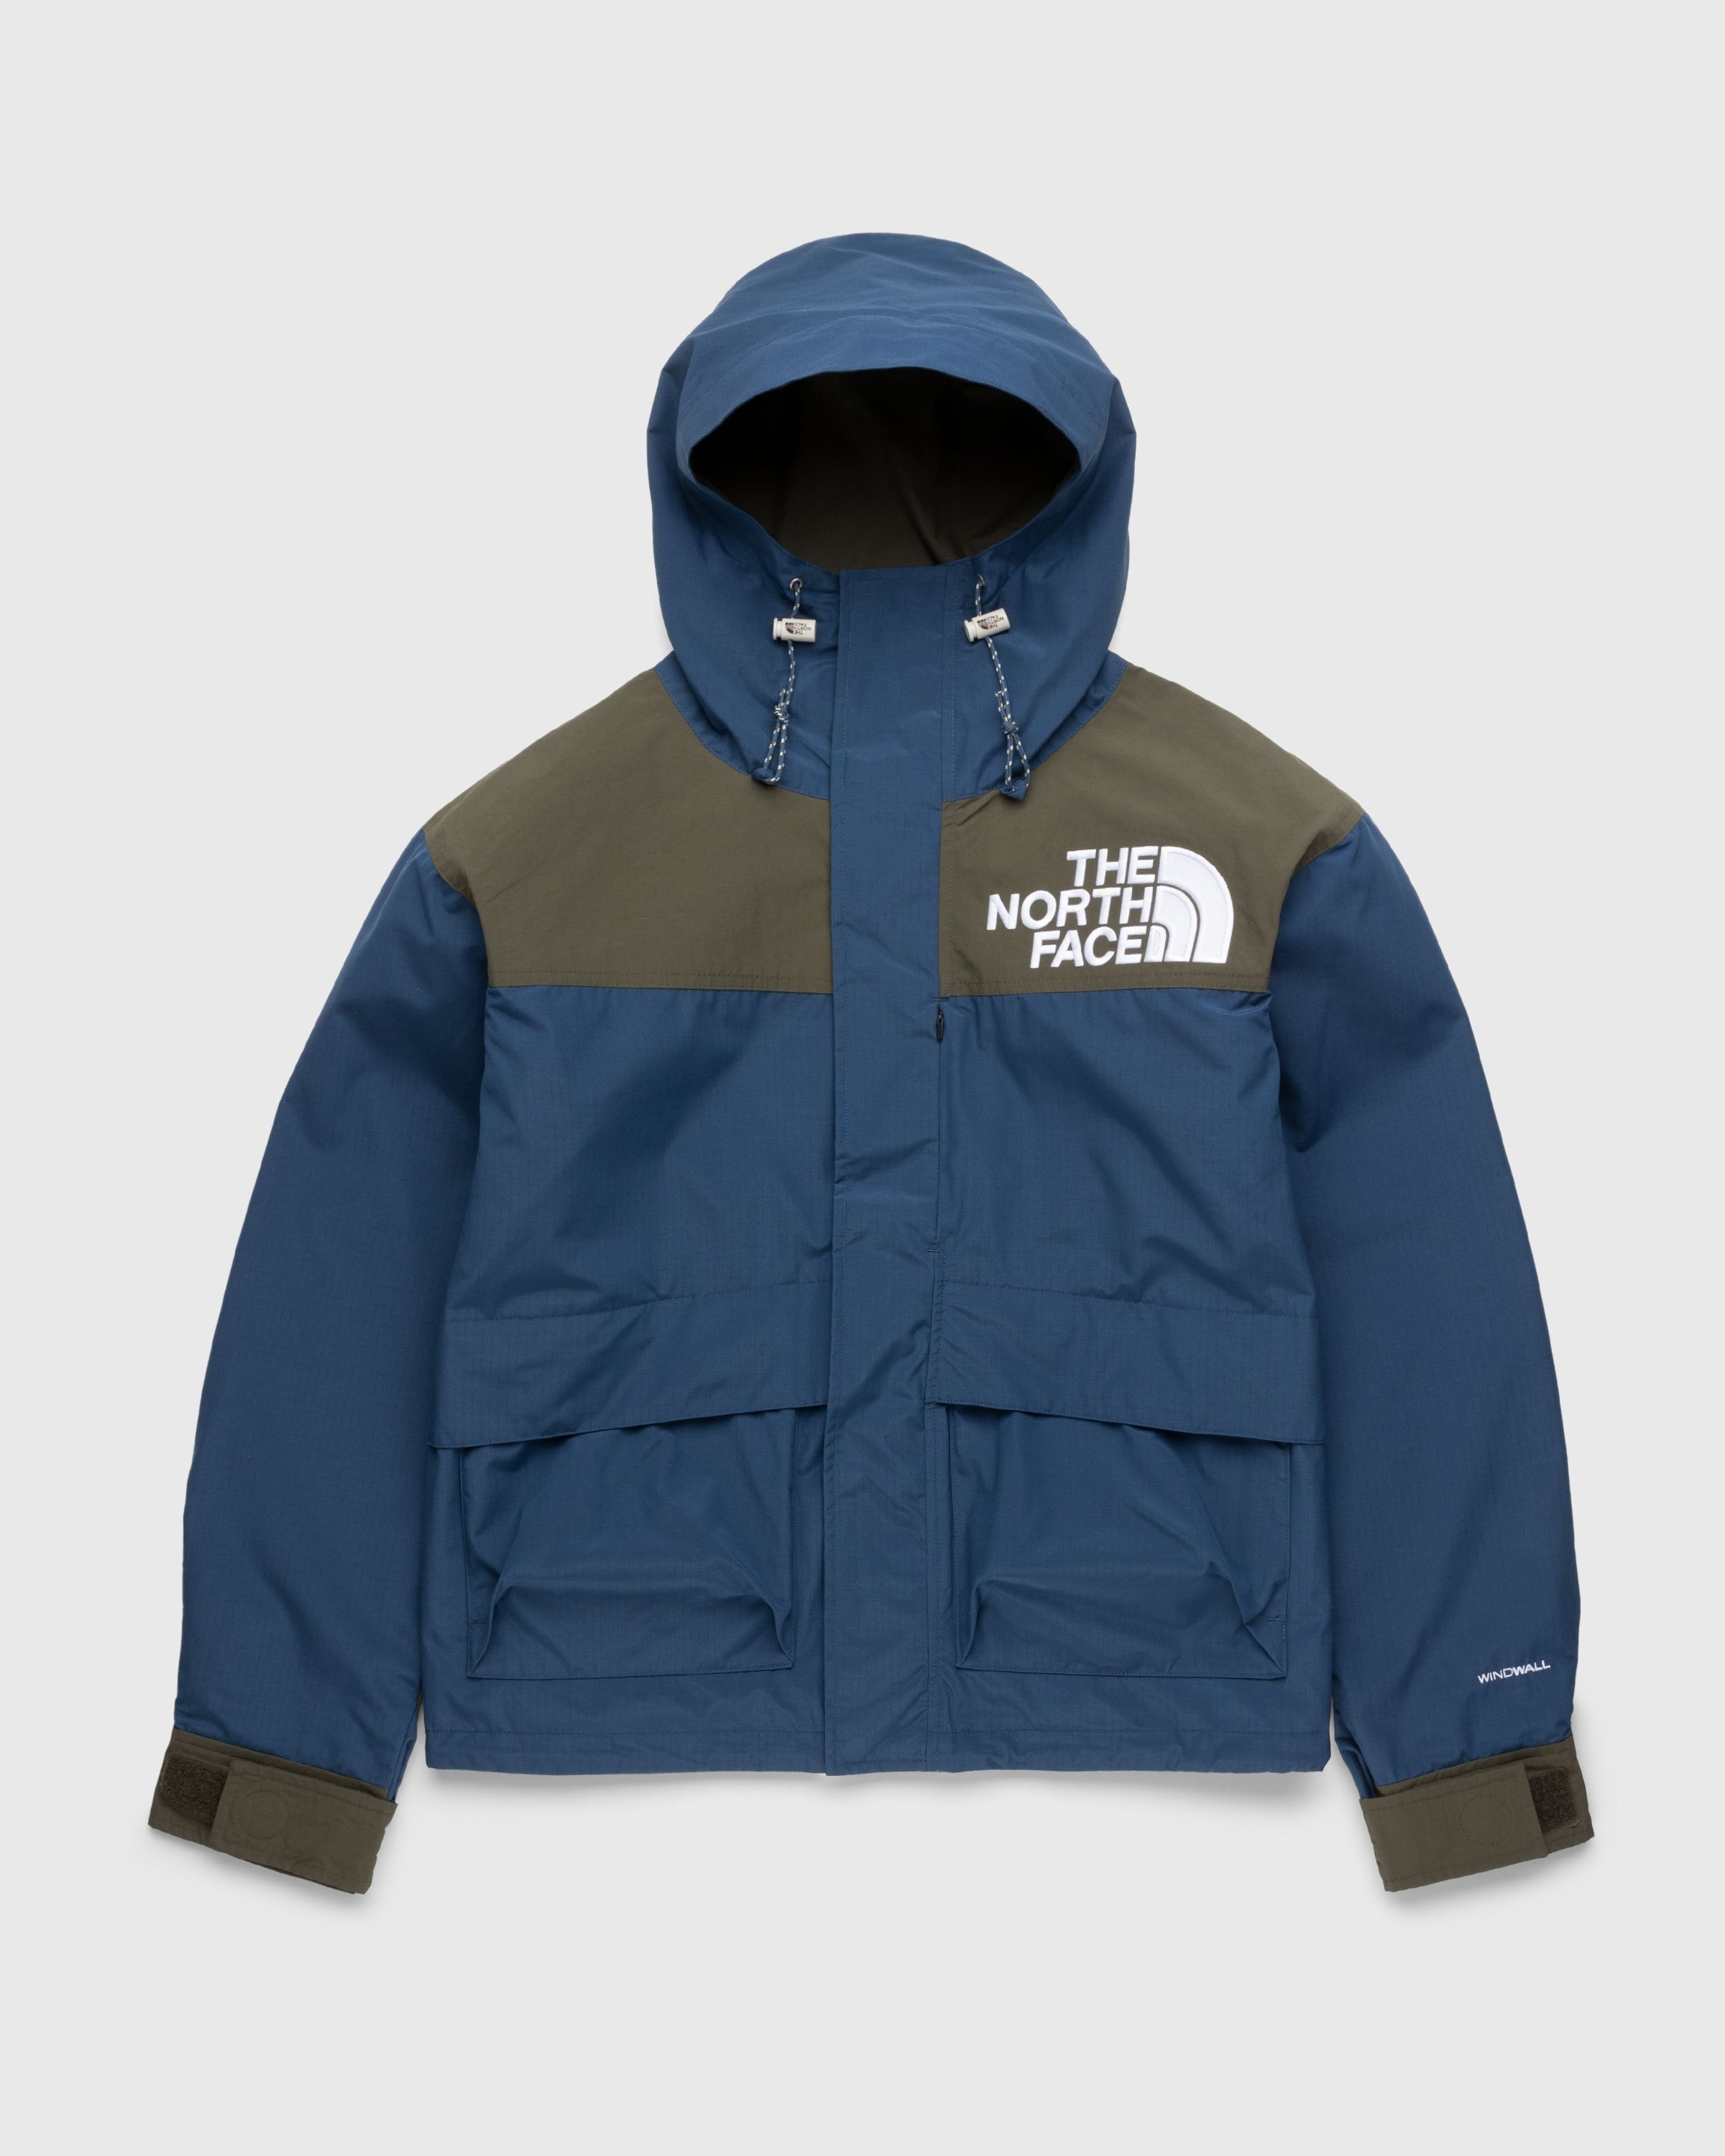 post office ask rumor north face taupe Publication volleyball Moral ...